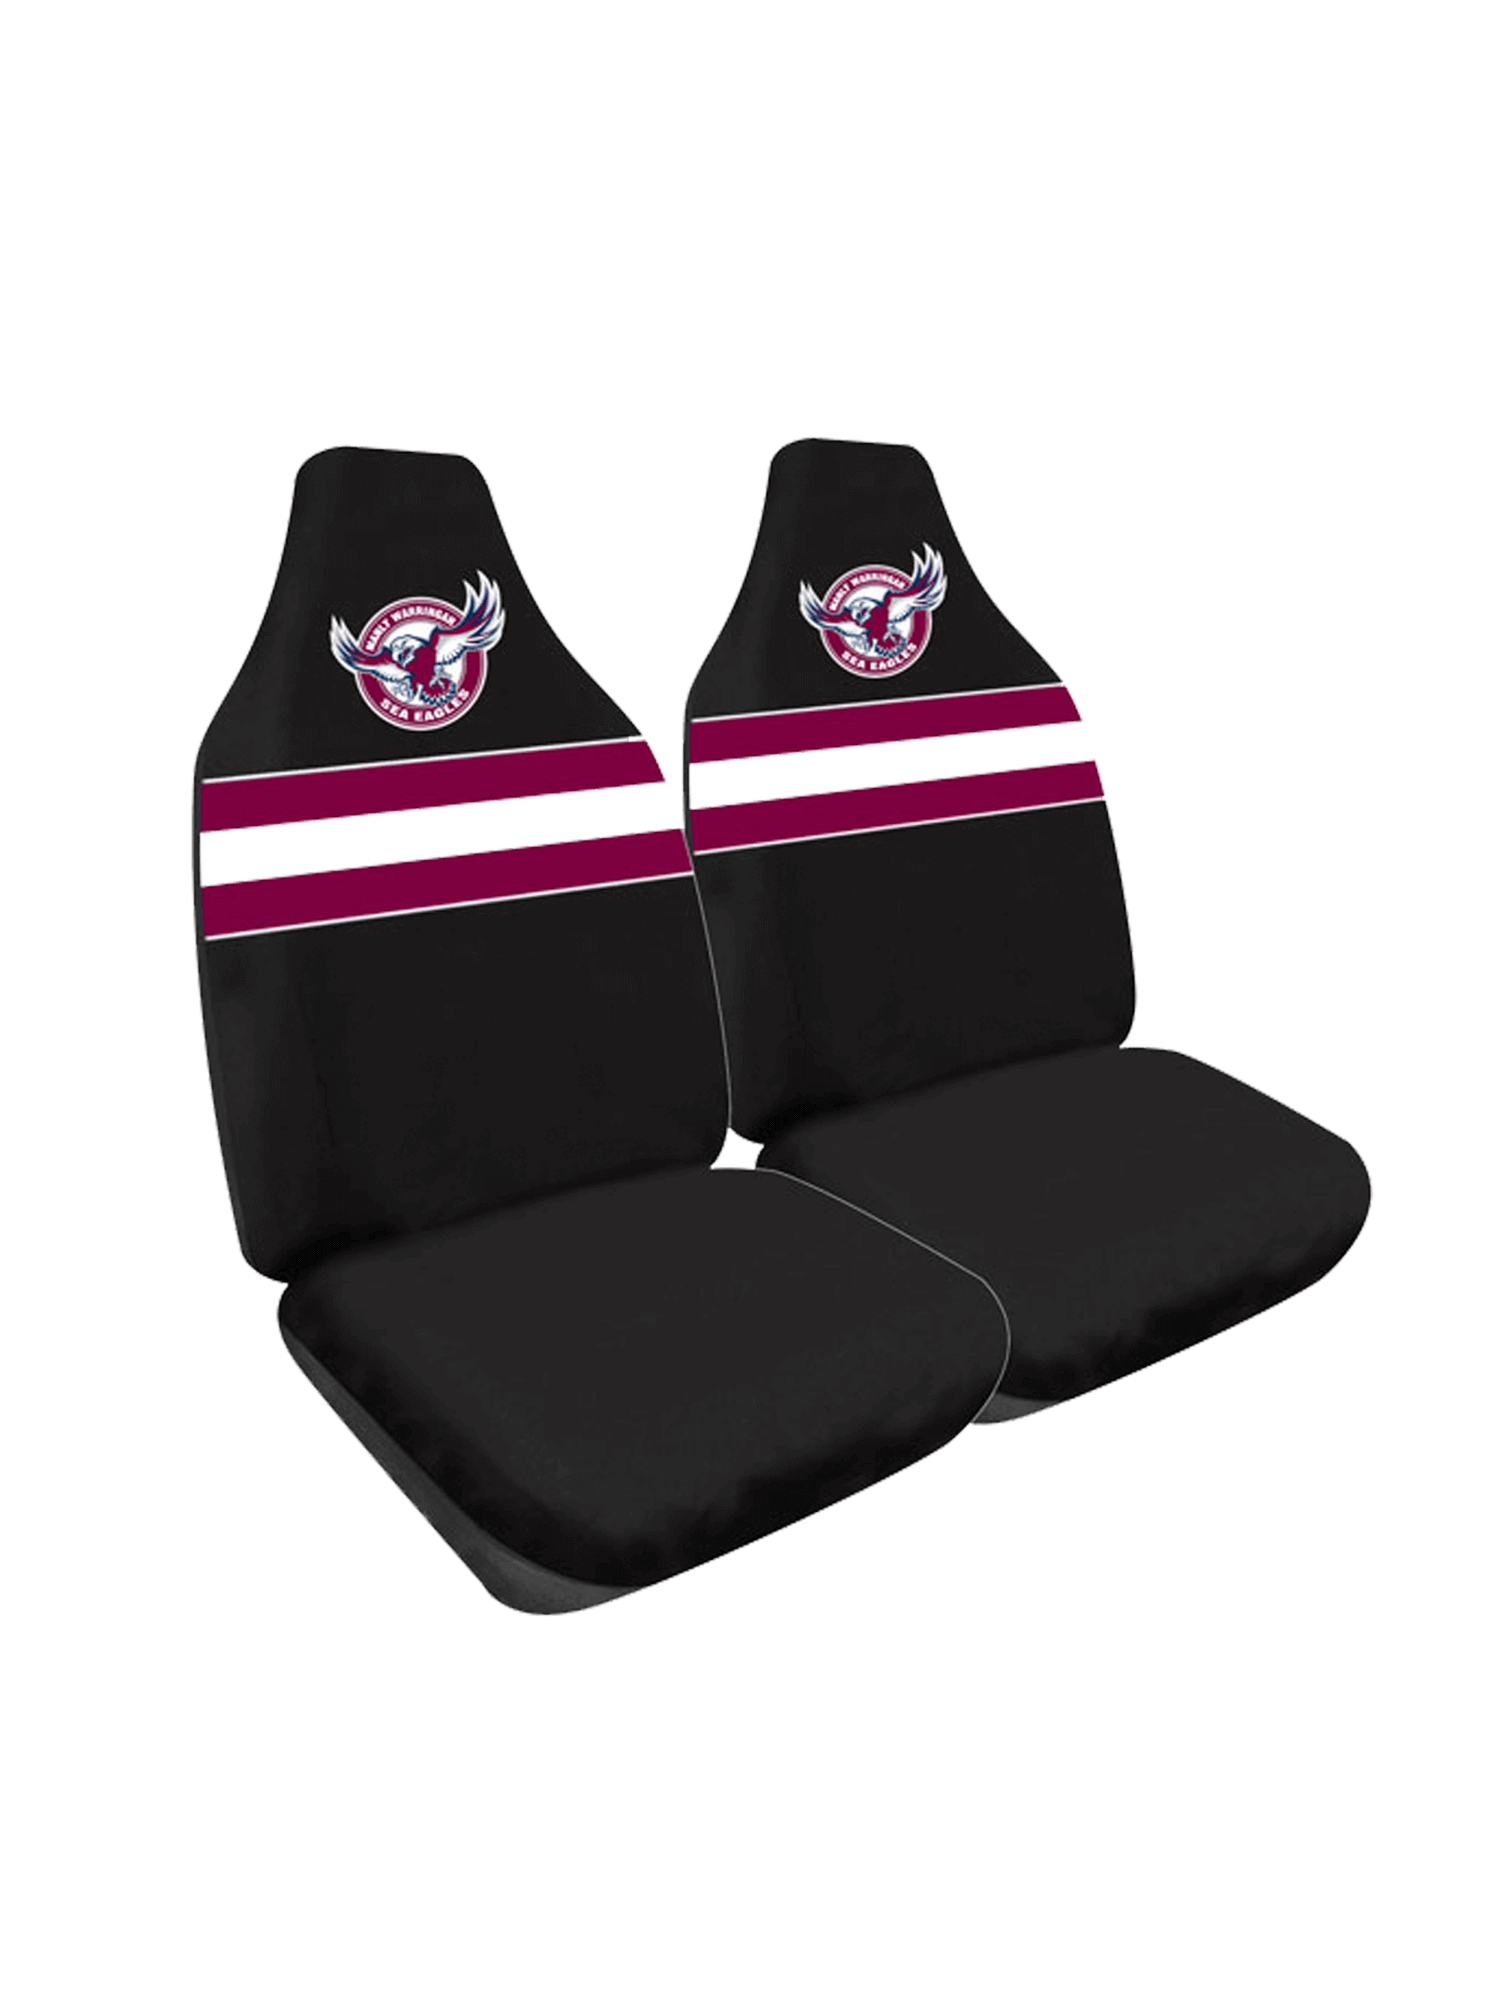 MANLY SEA EAGLES CAR SEAT COVERS_MANLY SEA EAGLES_STUBBY CLUB